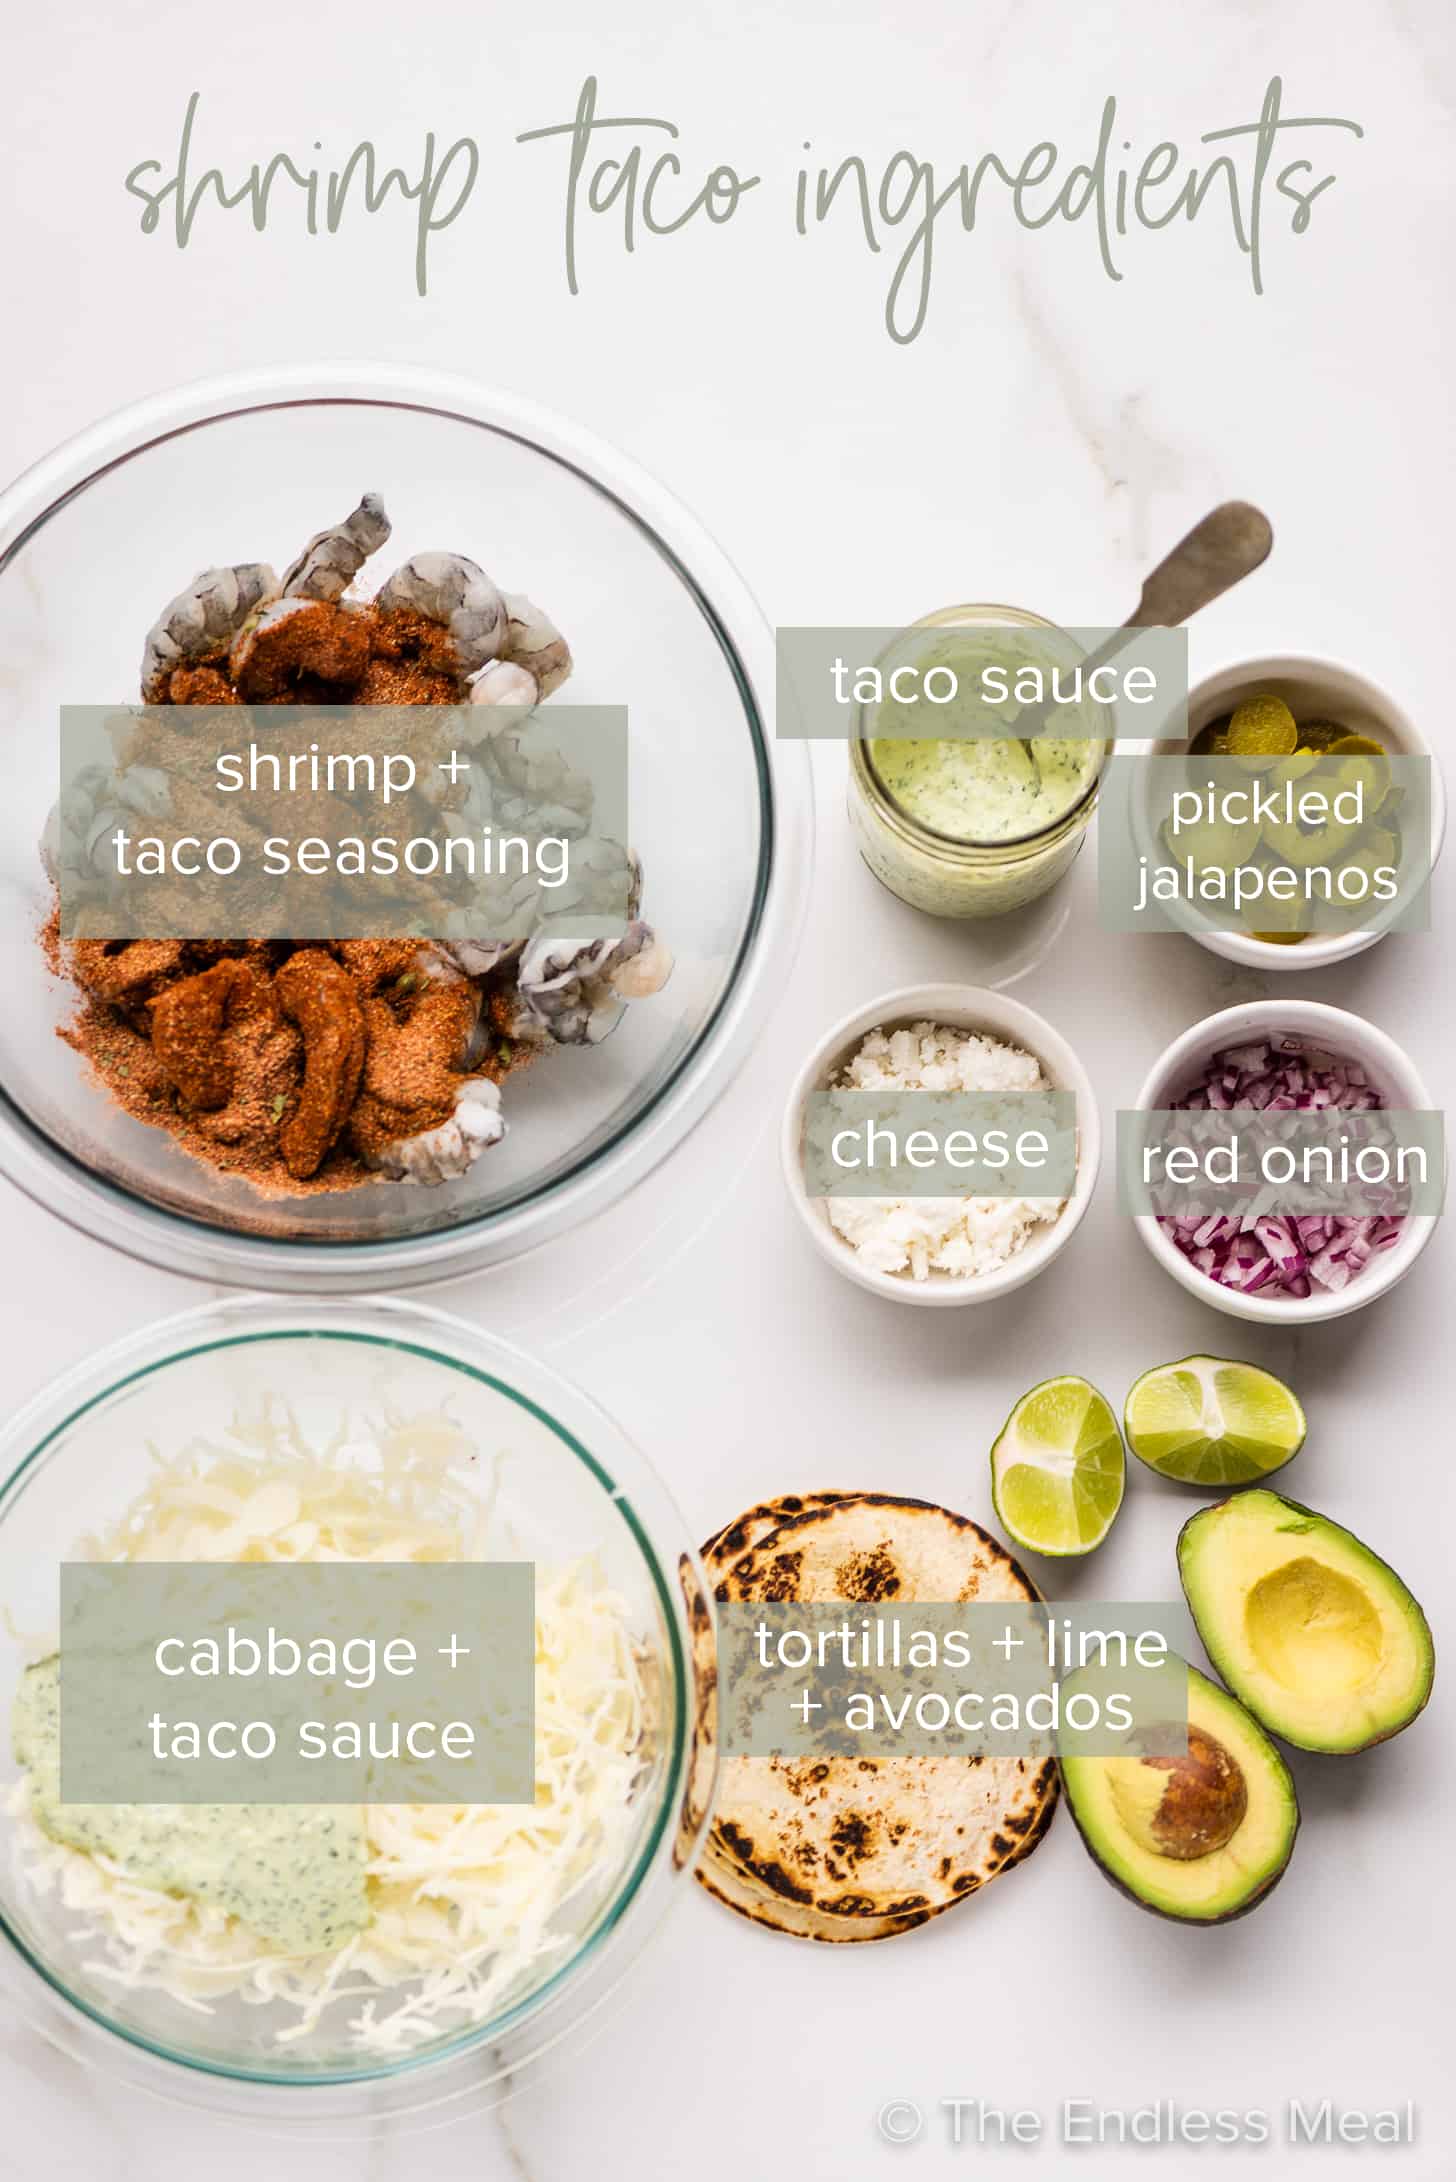 the ingredients needed to make this shrimp taco recipe